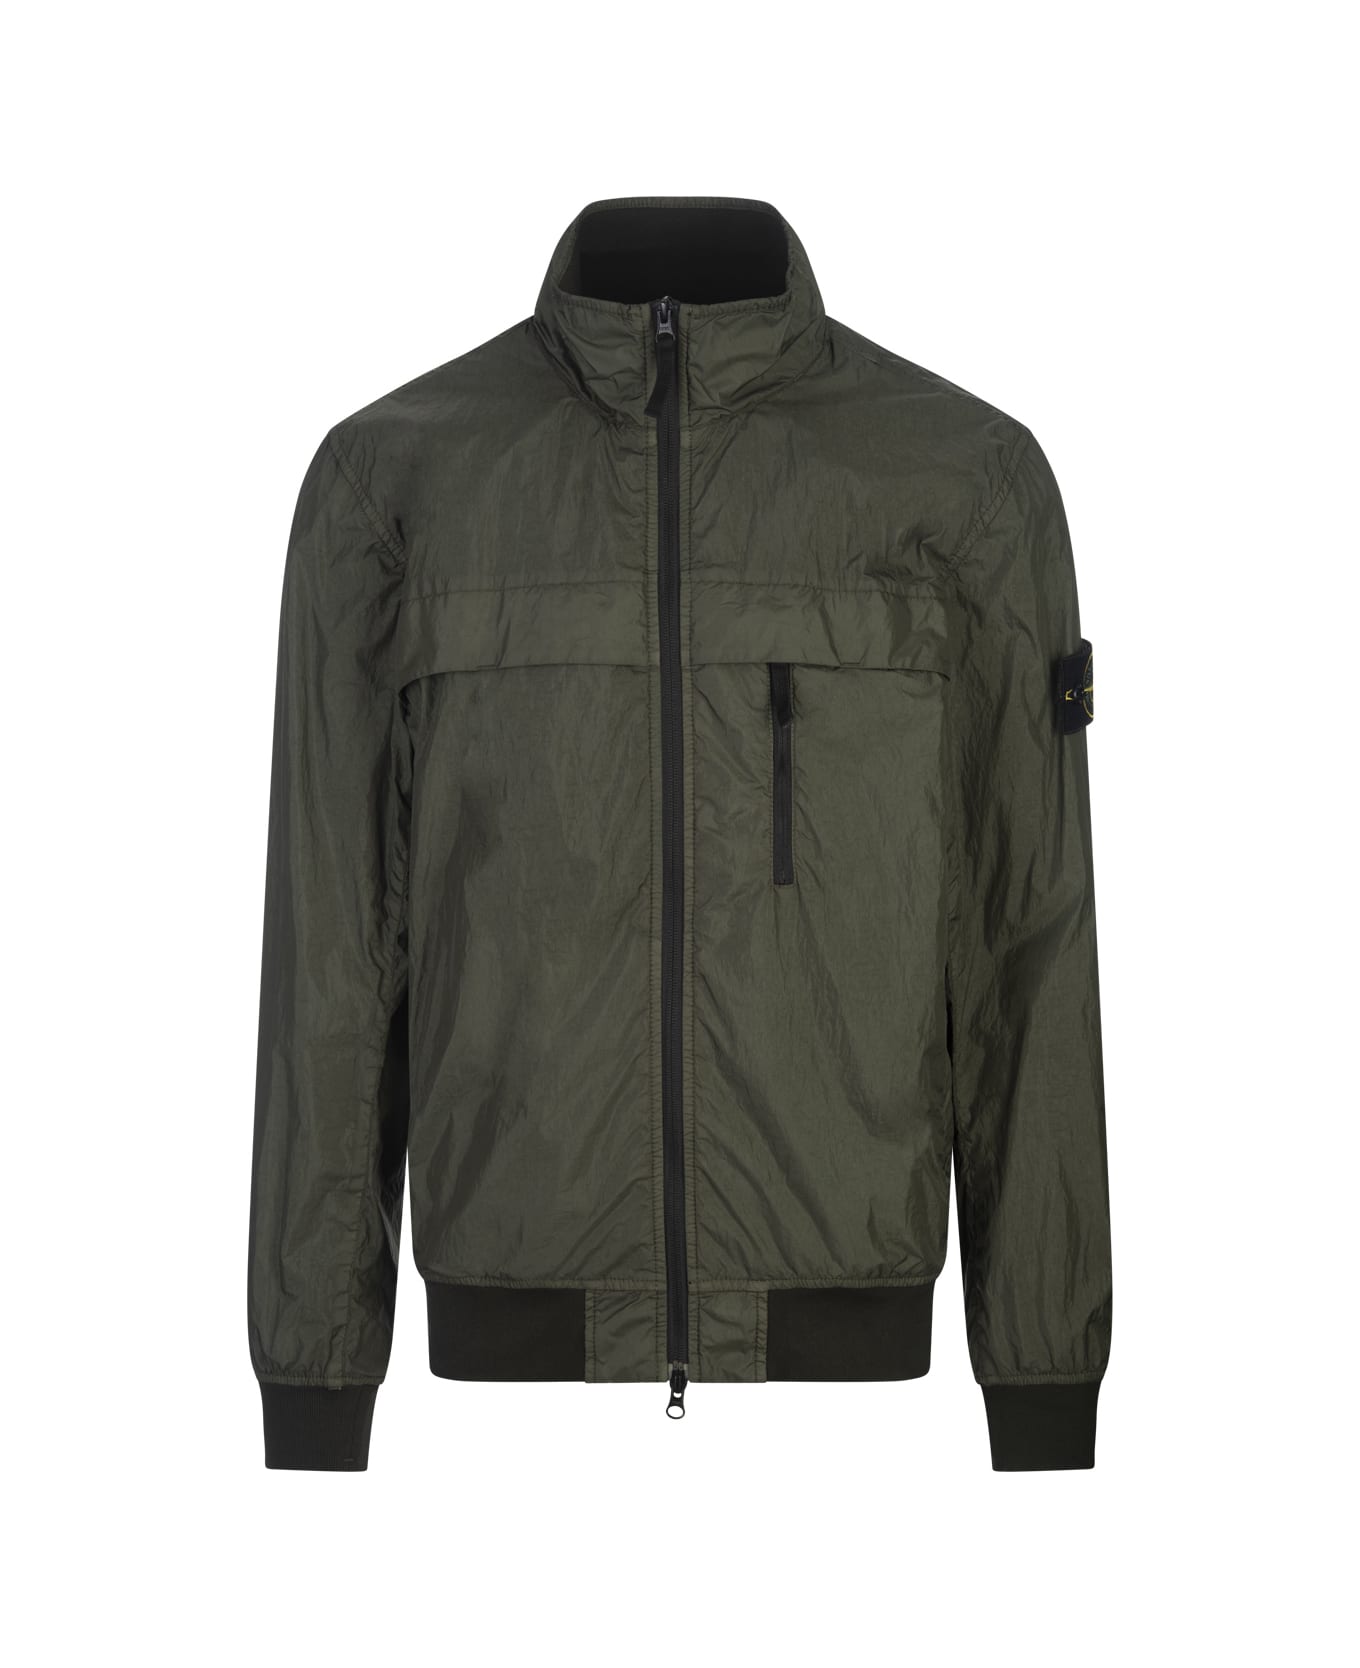 Stone Island Garment Dyed Crinkle Reps R-ny Jacket In Green - Green